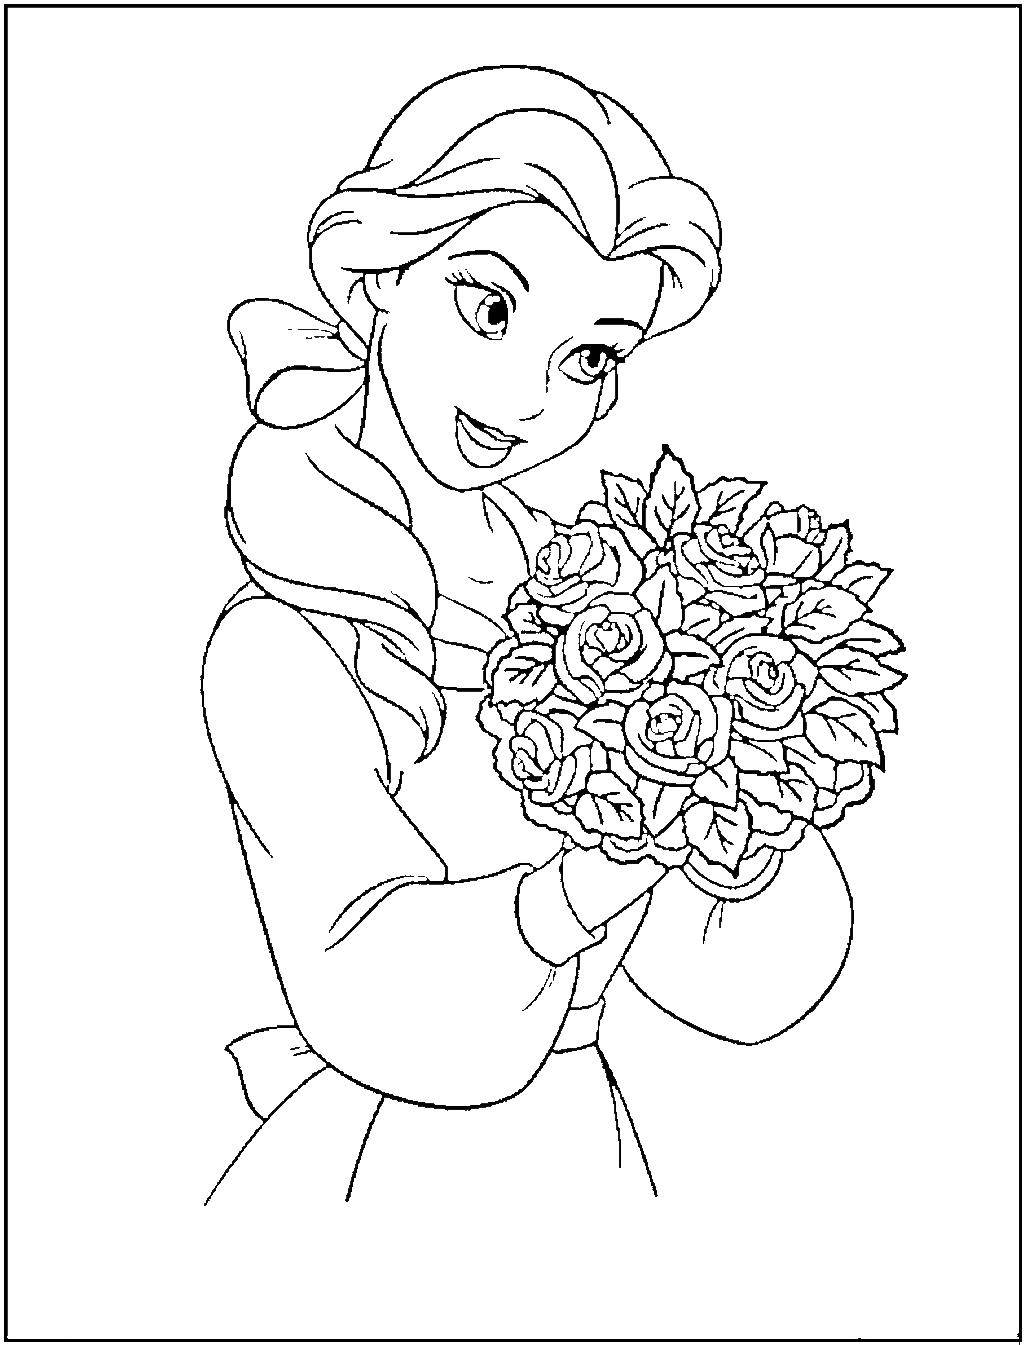 Coloring Bell with roses. Category Princess. Tags:  bell, beautiful.